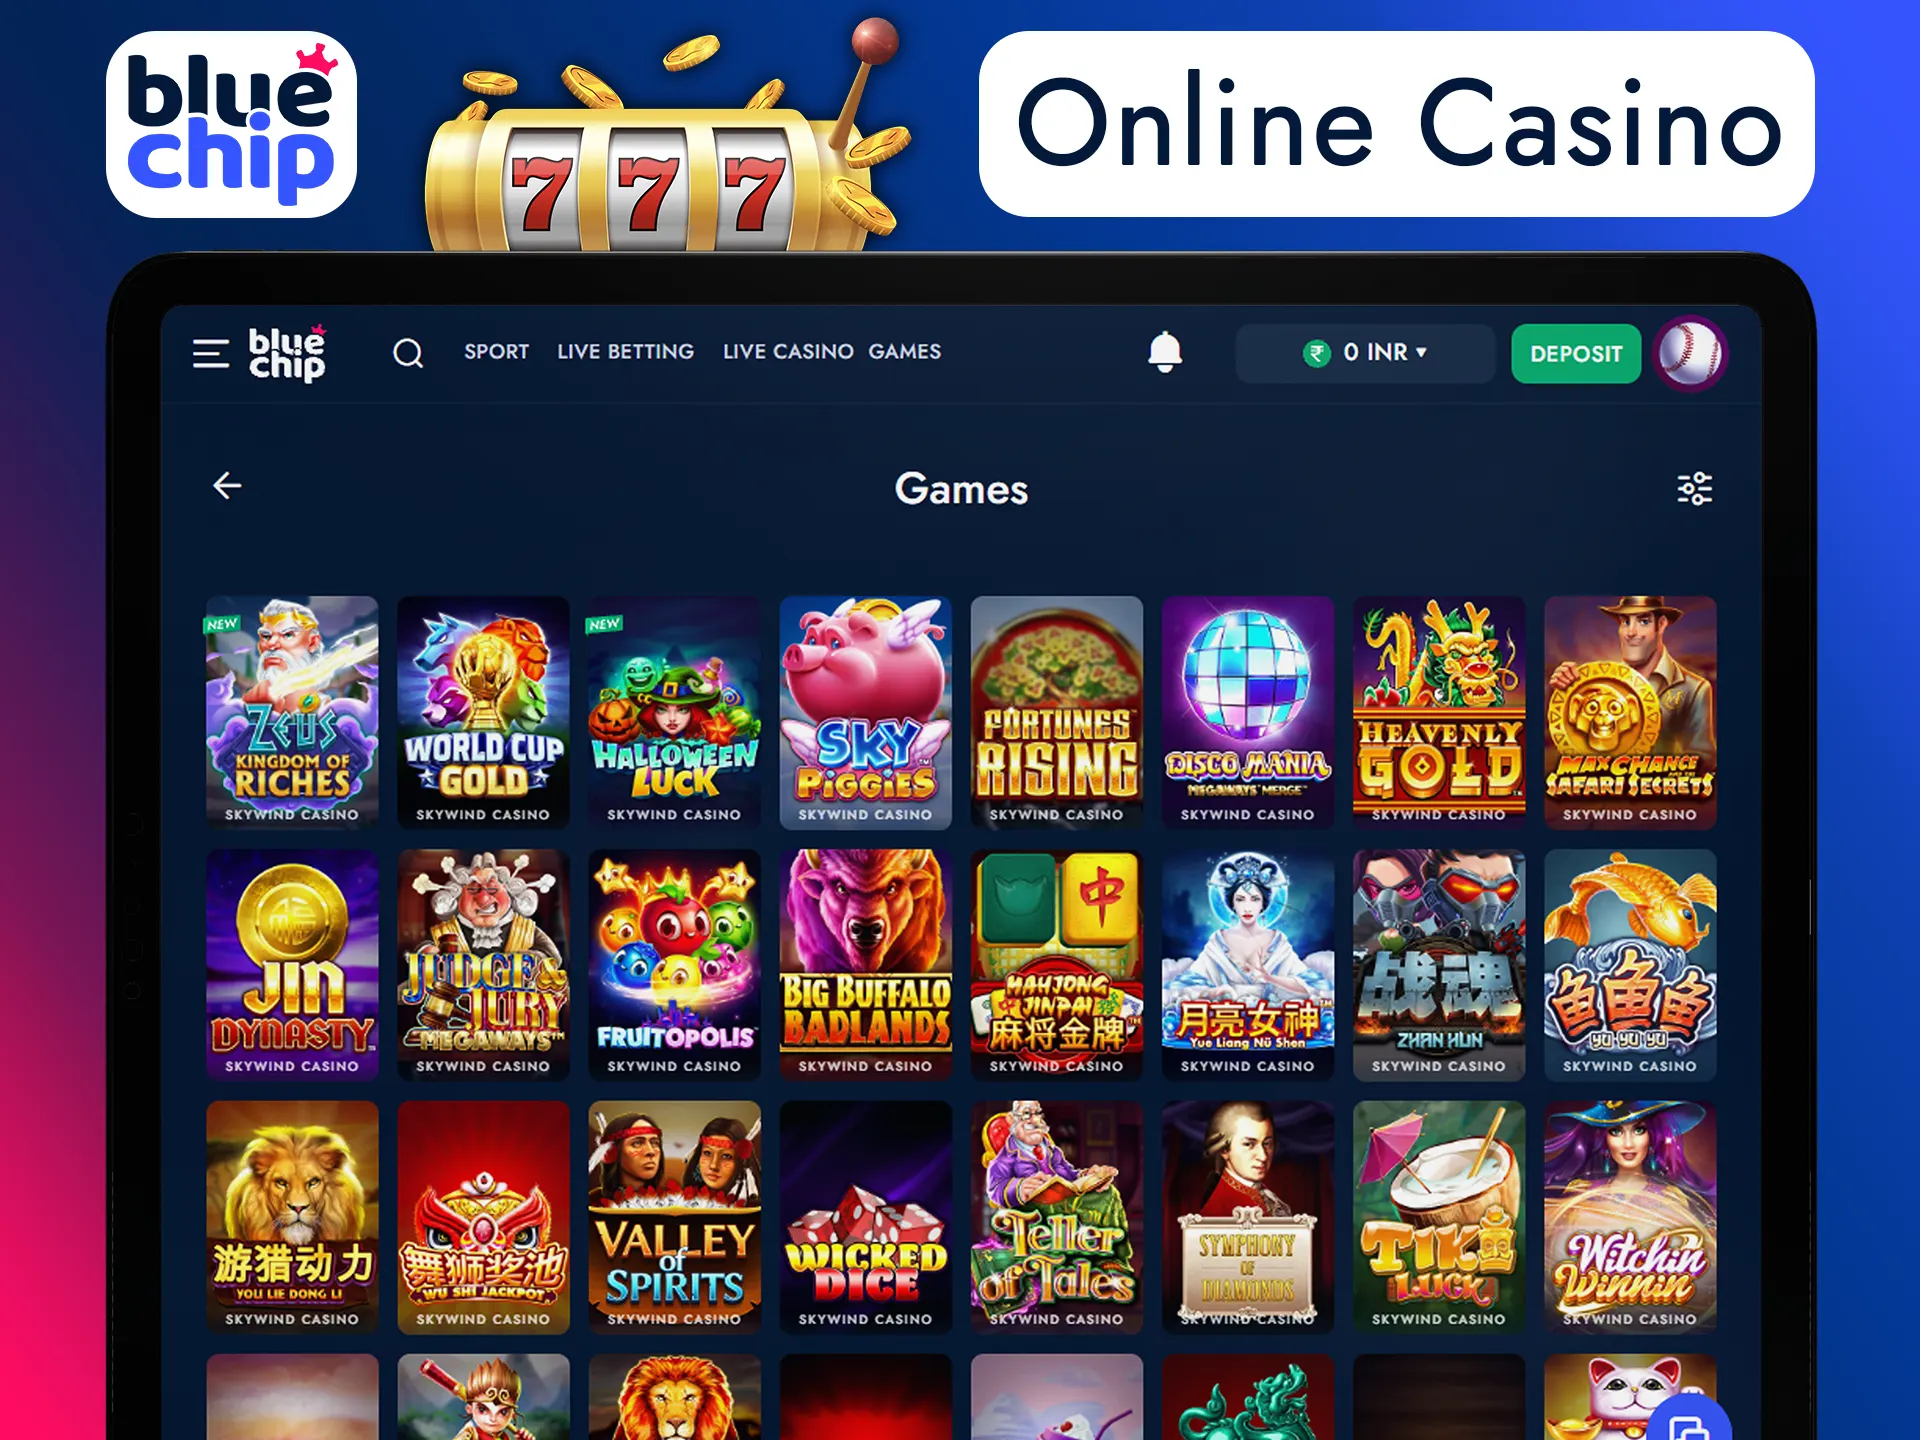 Play and win money at Bluechip casino.